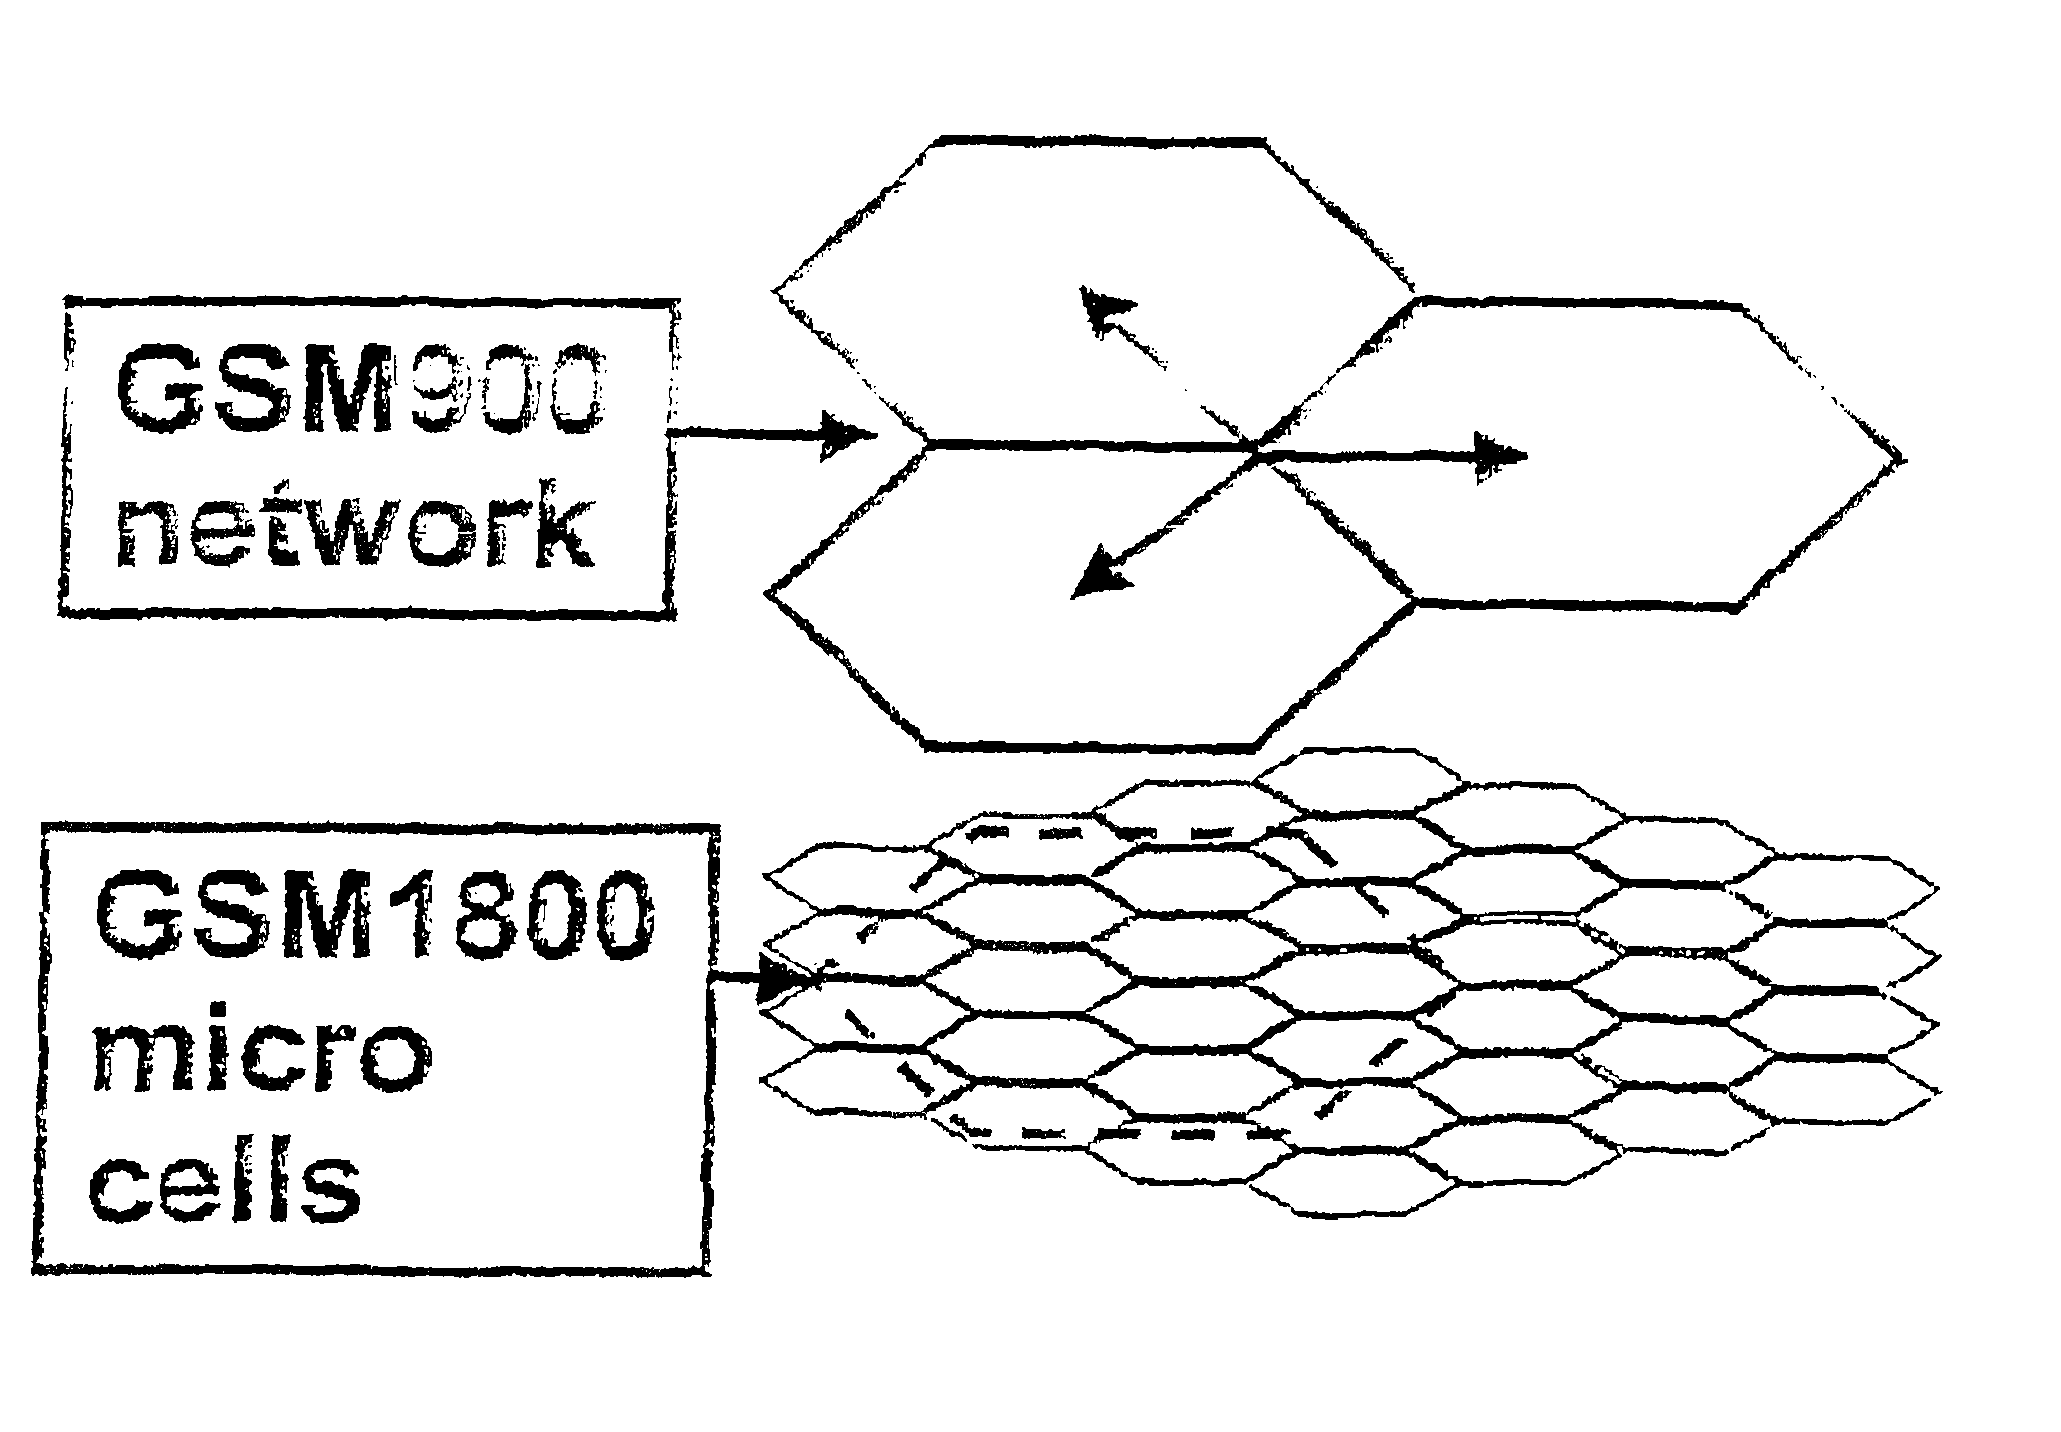 Generation of a space-related traffic database in a radio network